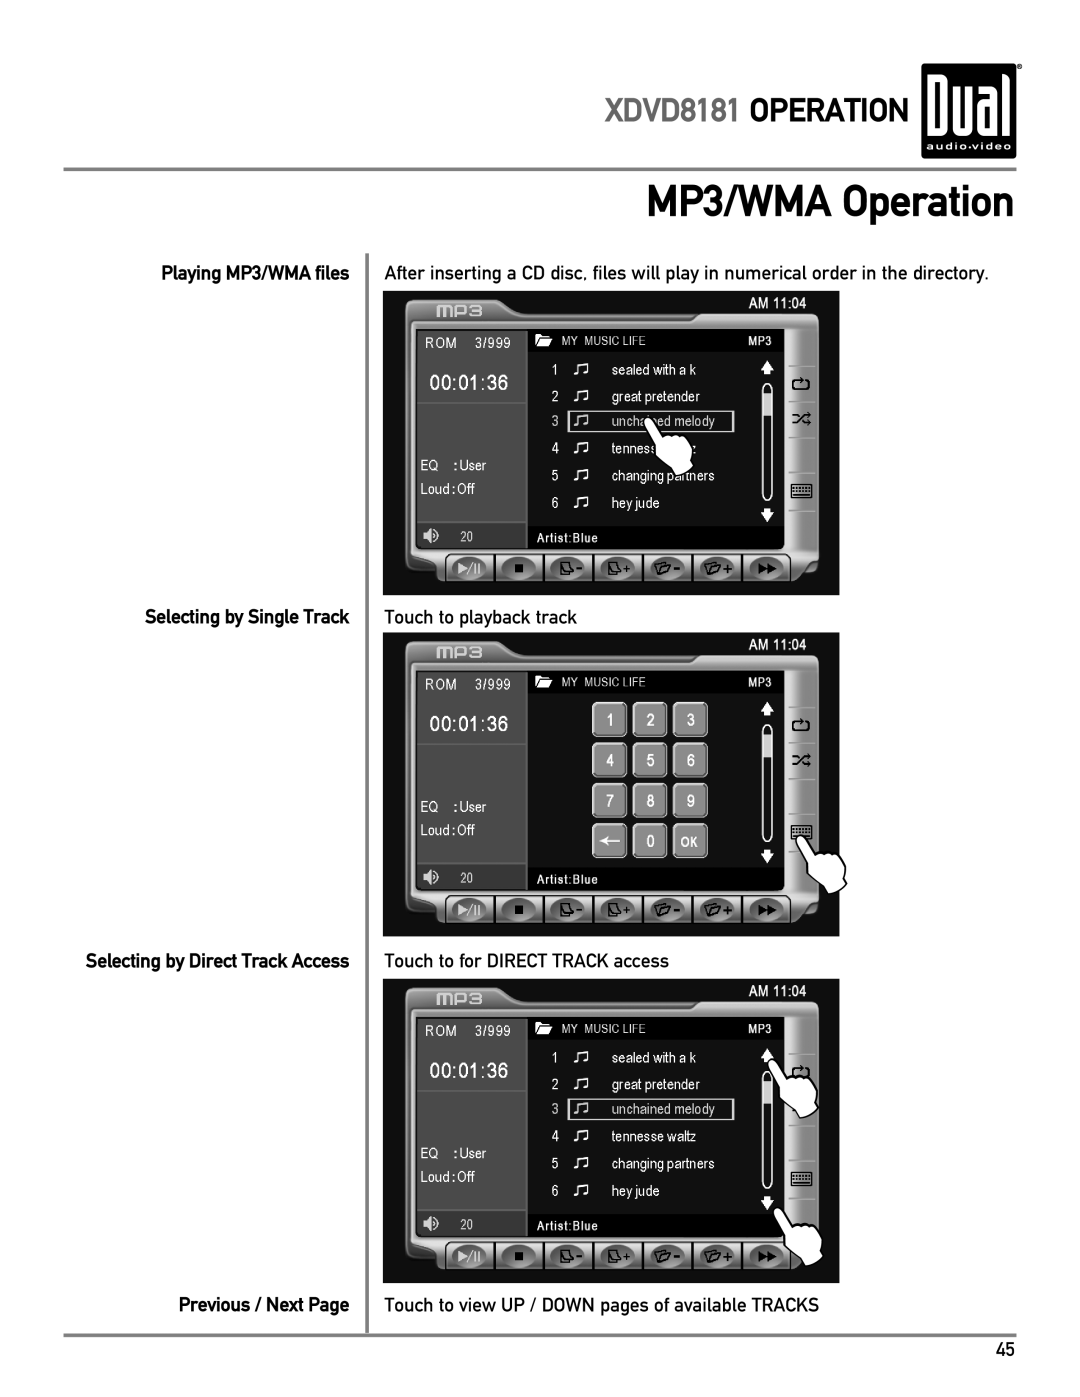 Dual MP3/WMA Operation, XDVD8181 OPERATION, Playing MP3/WMA files Selecting by Single Track, Previous / Next Page 